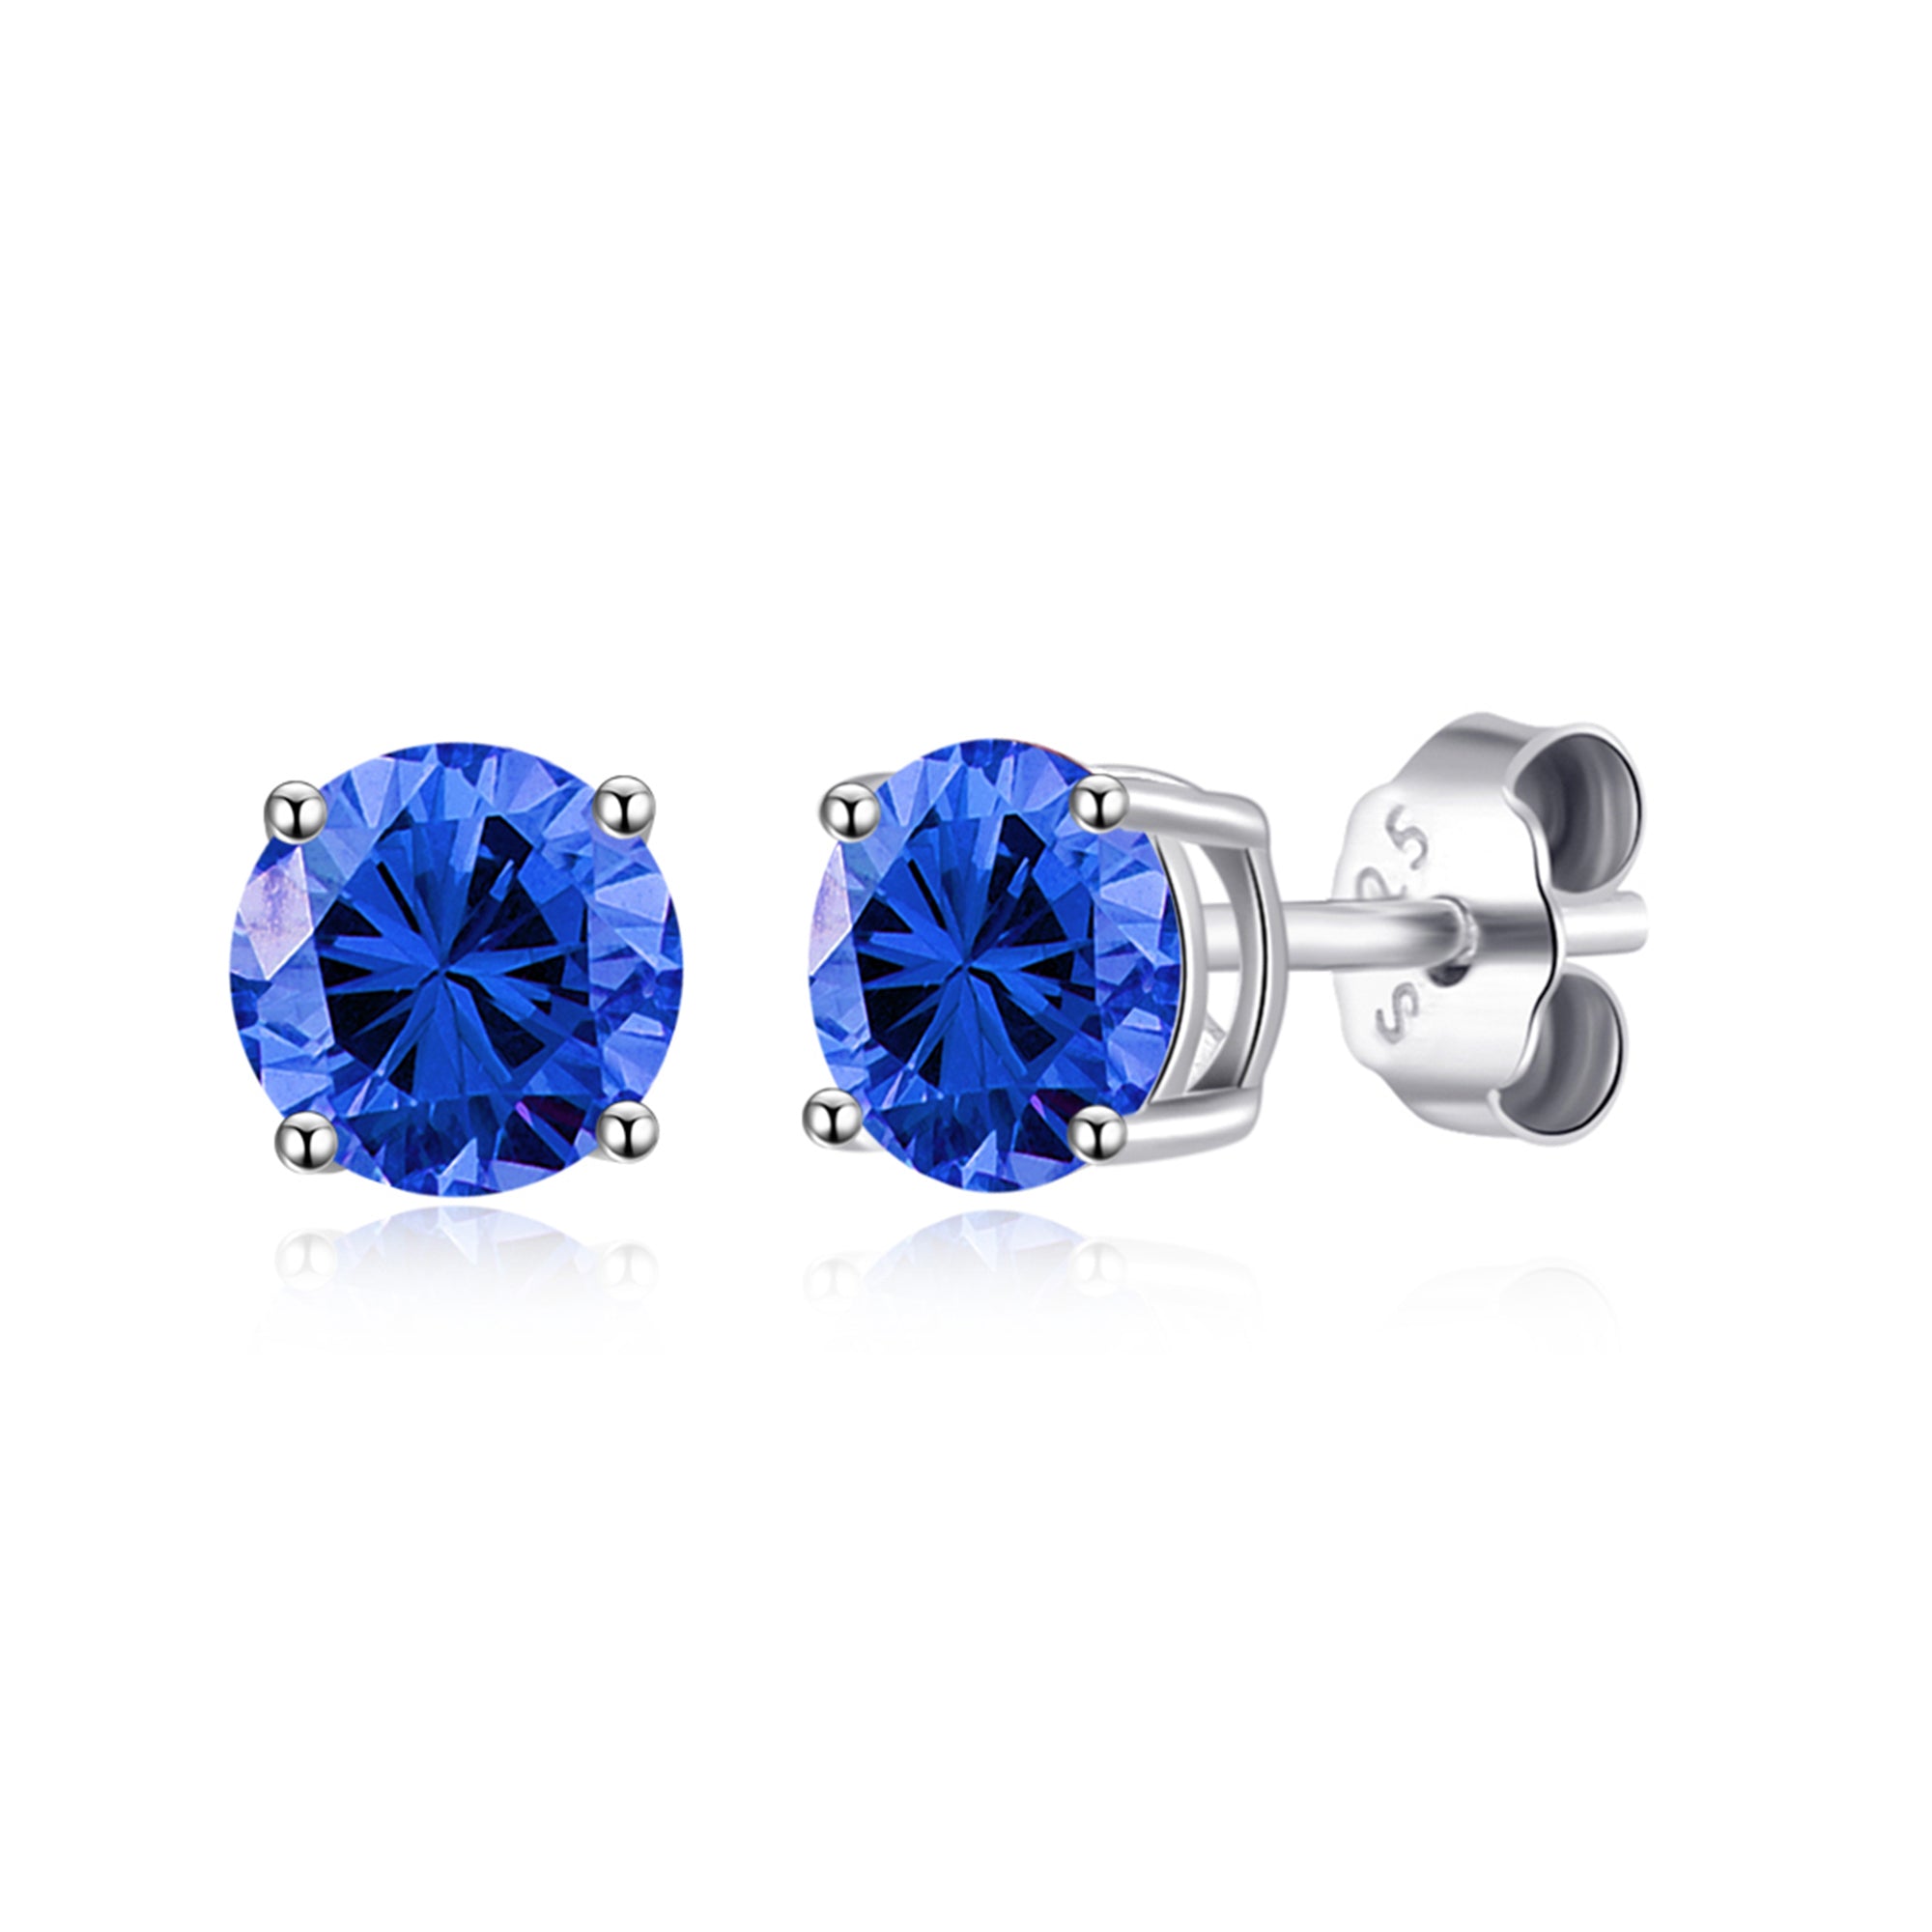 Sterling Silver September (Sapphire) Birthstone Earrings Created with Zircondia® Crystals by Philip Jones Jewellery